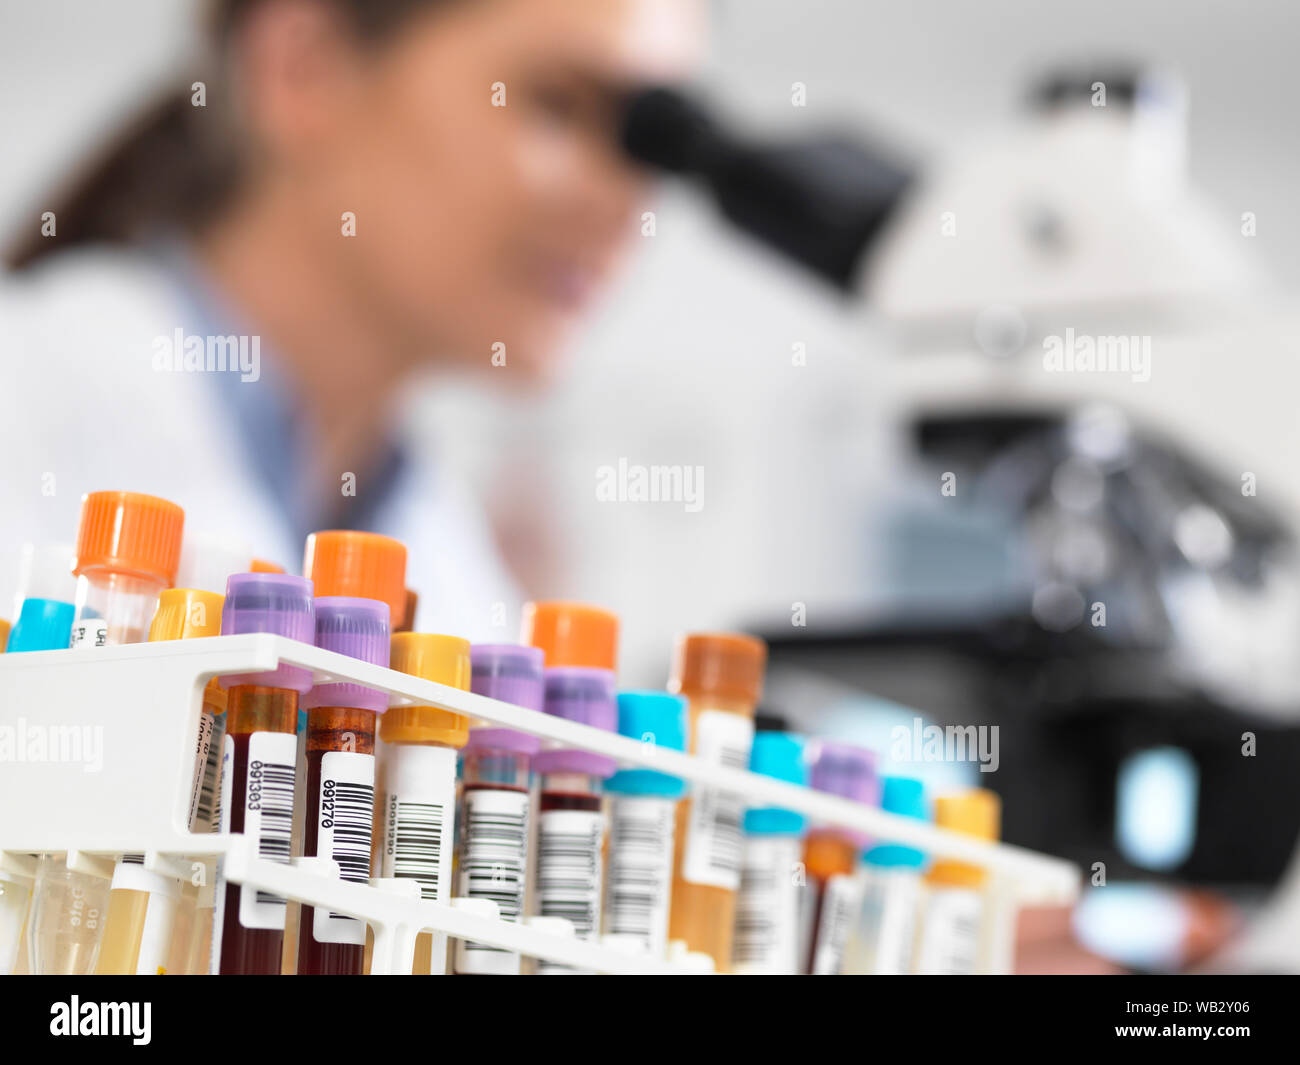 Medical screening. Scientist examining a glass slide containing a human sample under a microscope. Stock Photo